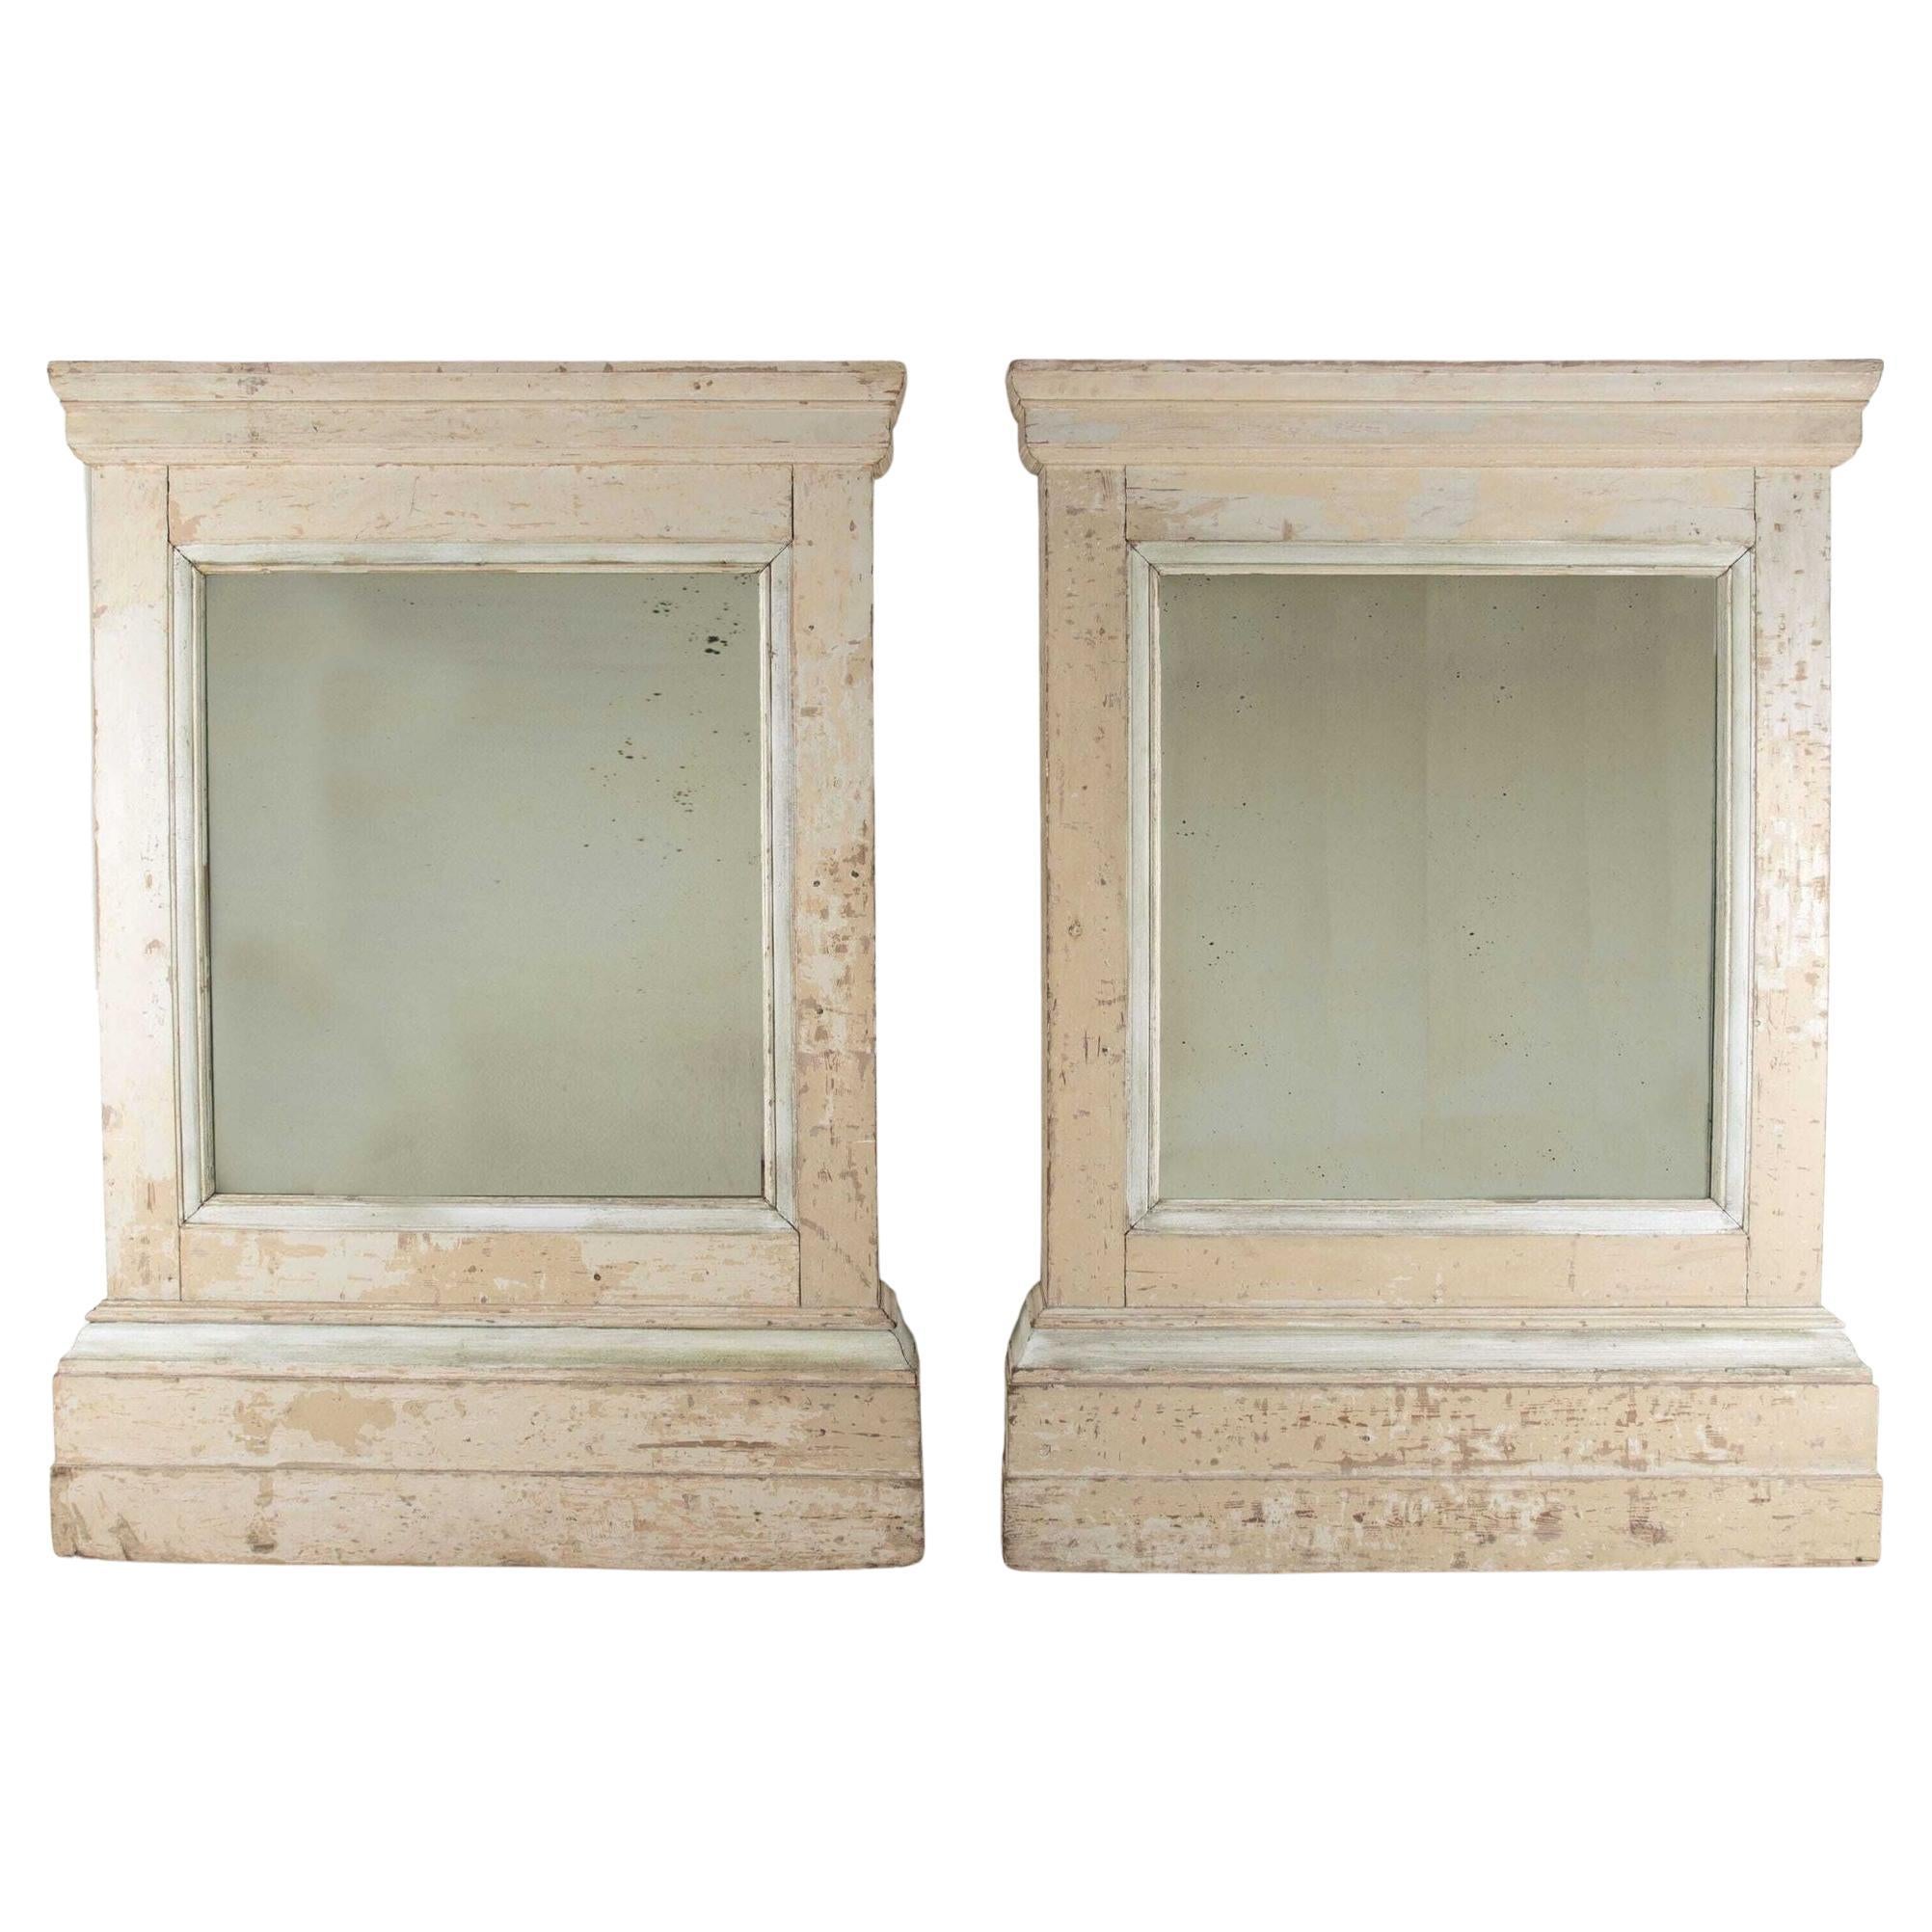 Pair of Architectural Mirrors